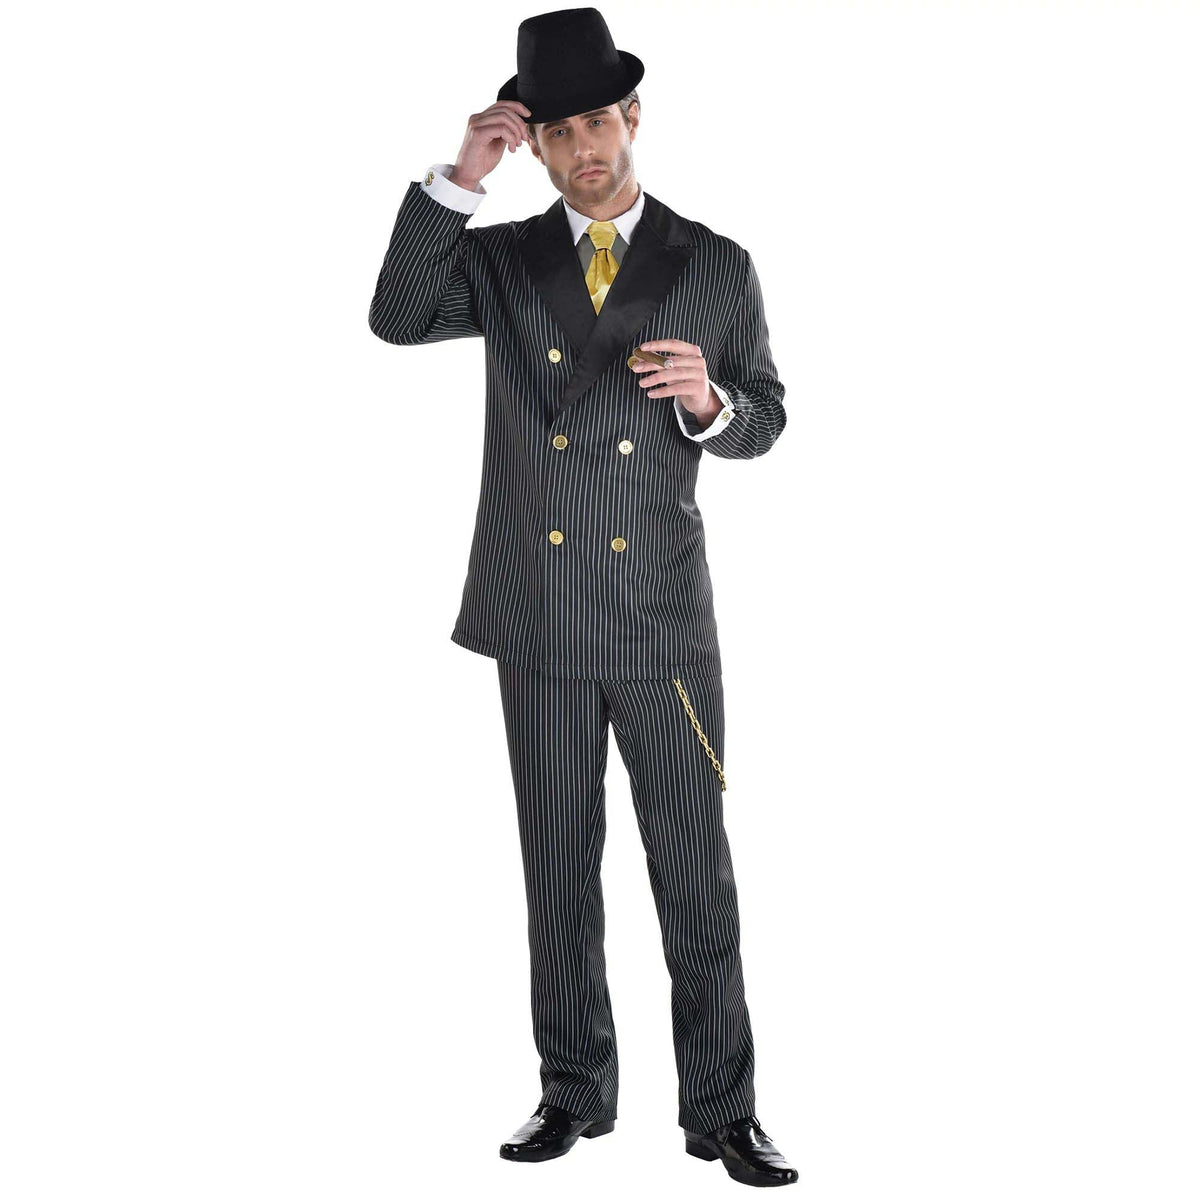 HALLOWEEN COSTUME CO. Costumes 20s Head Honcho Gangster Costume for Adults, Black and White Jacket